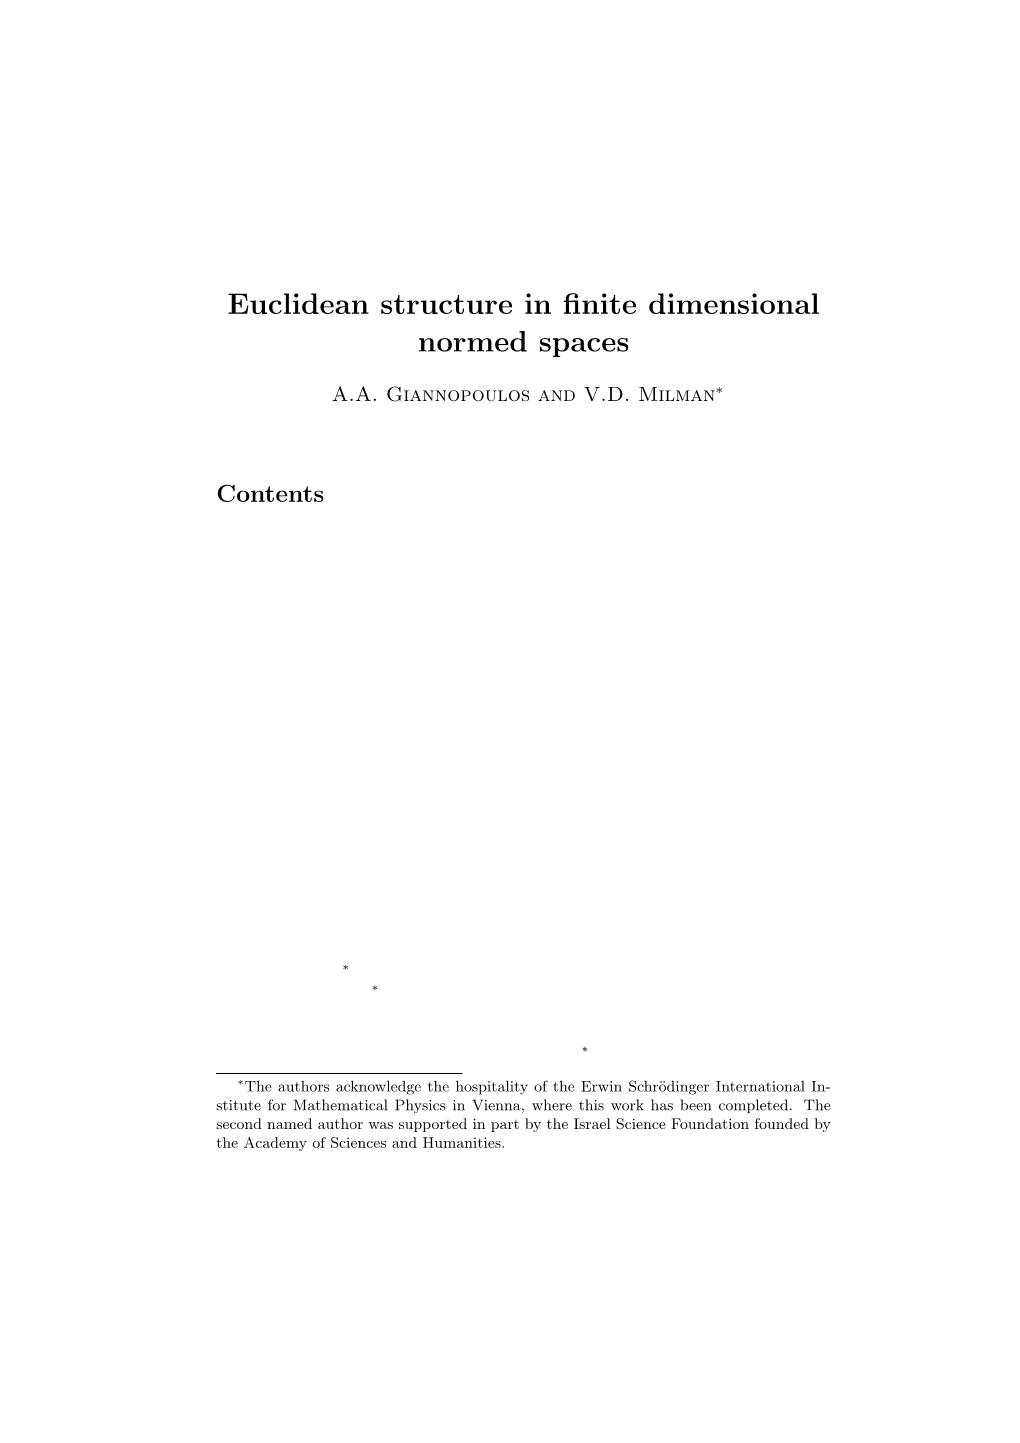 Euclidean Structure in Finite Dimensional Normed Spaces